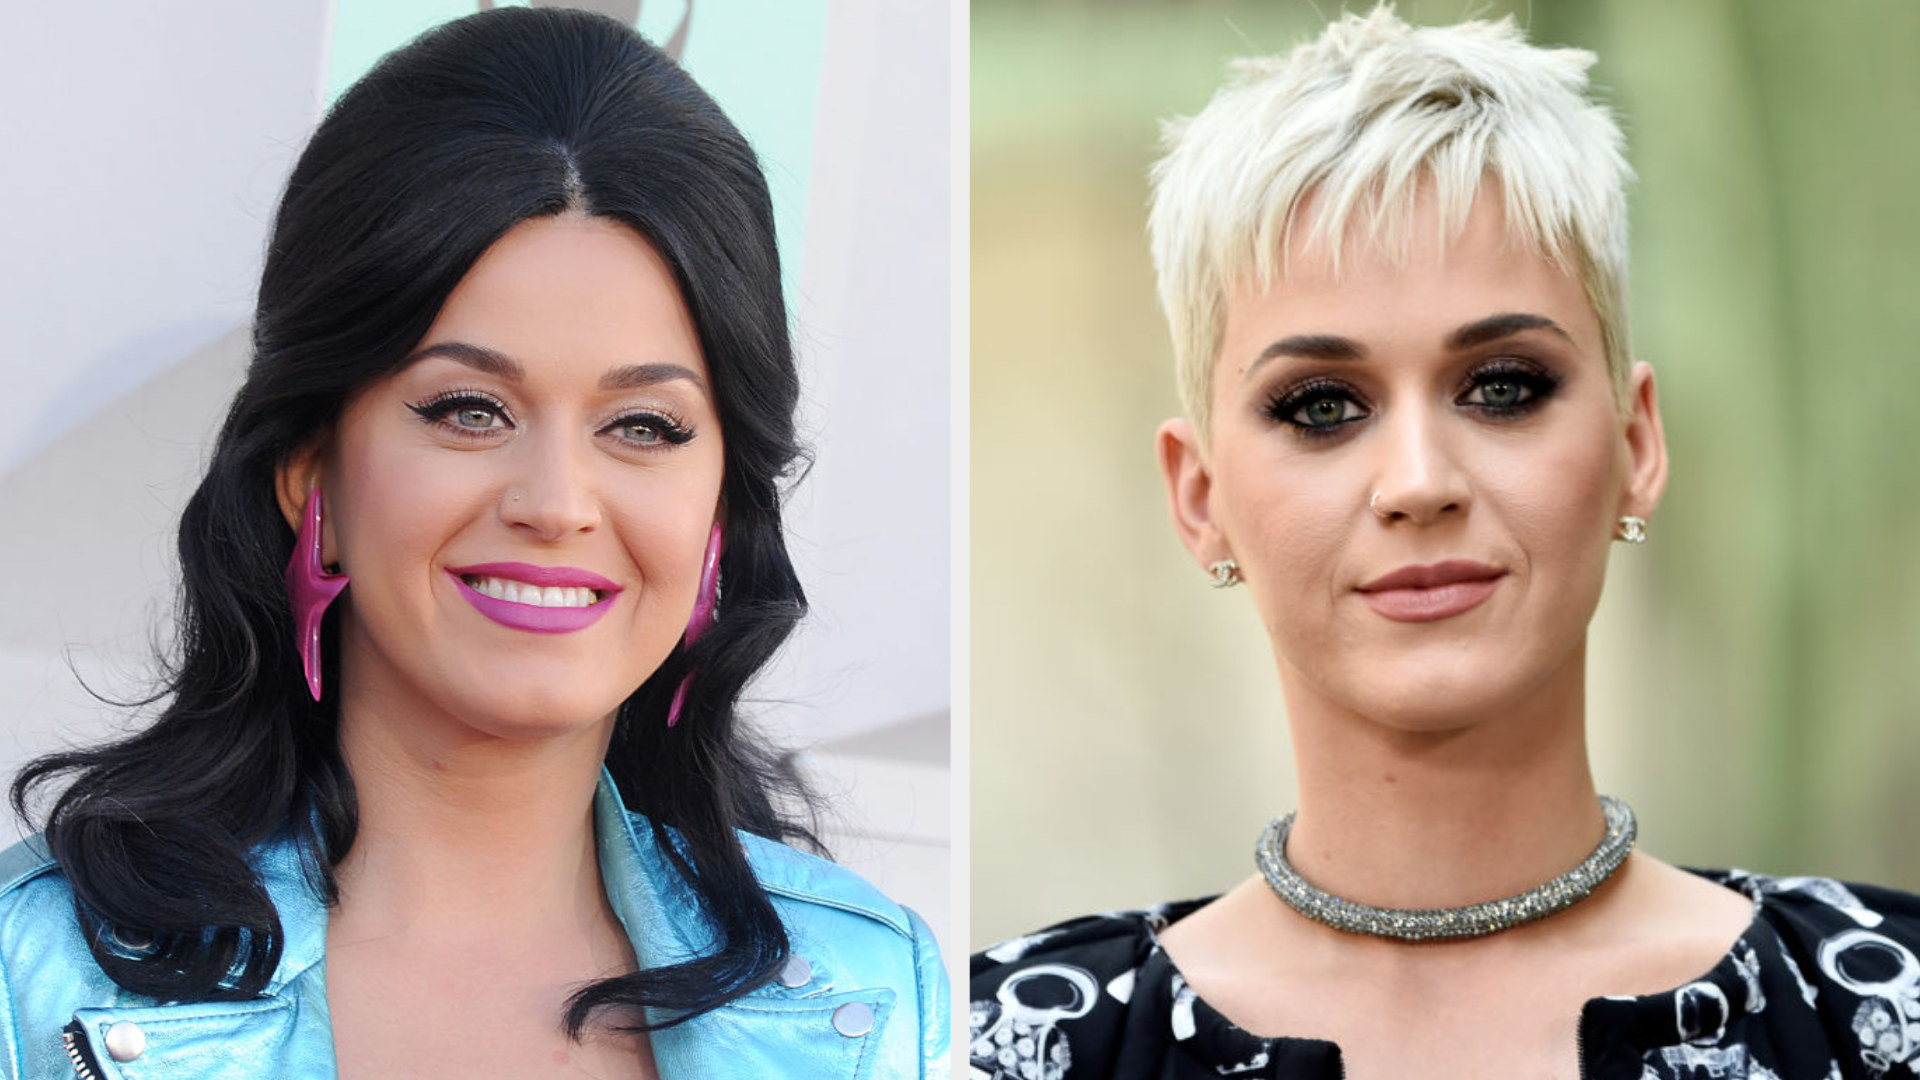 This Is Why People Are Upset About Katy Perry's Controversial 